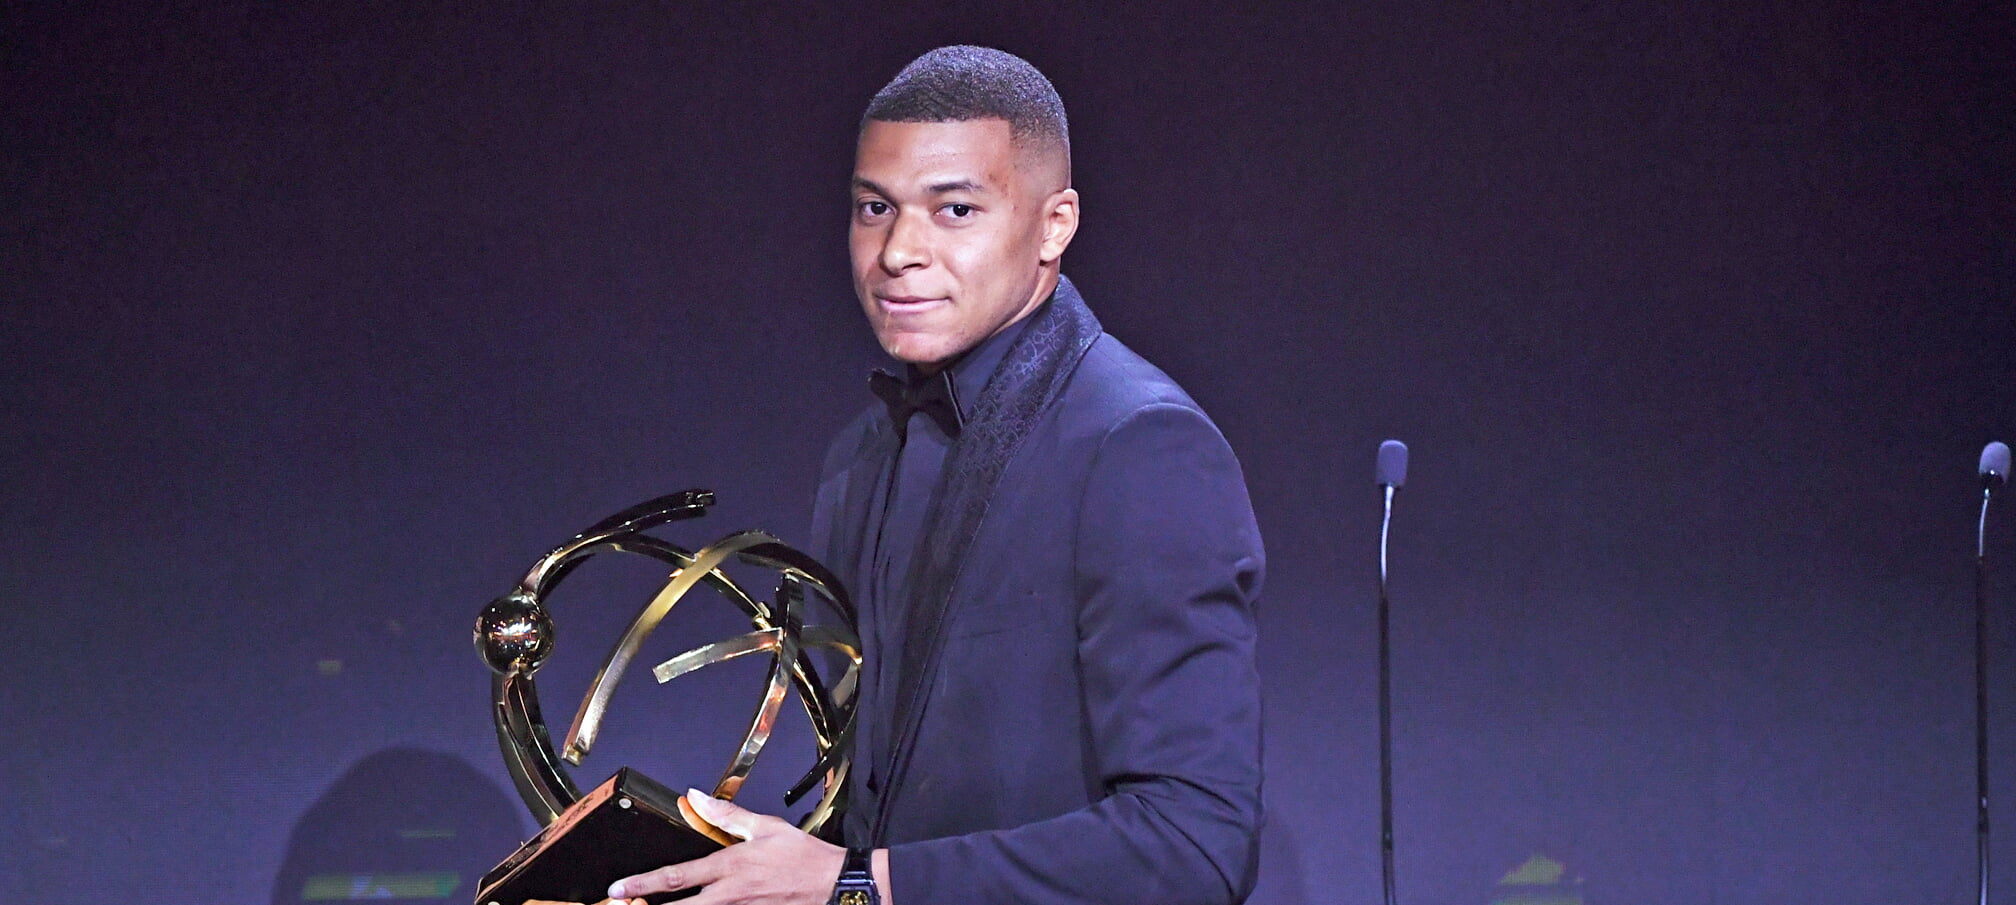 Mbappé staying at PSG after Player of the Season award